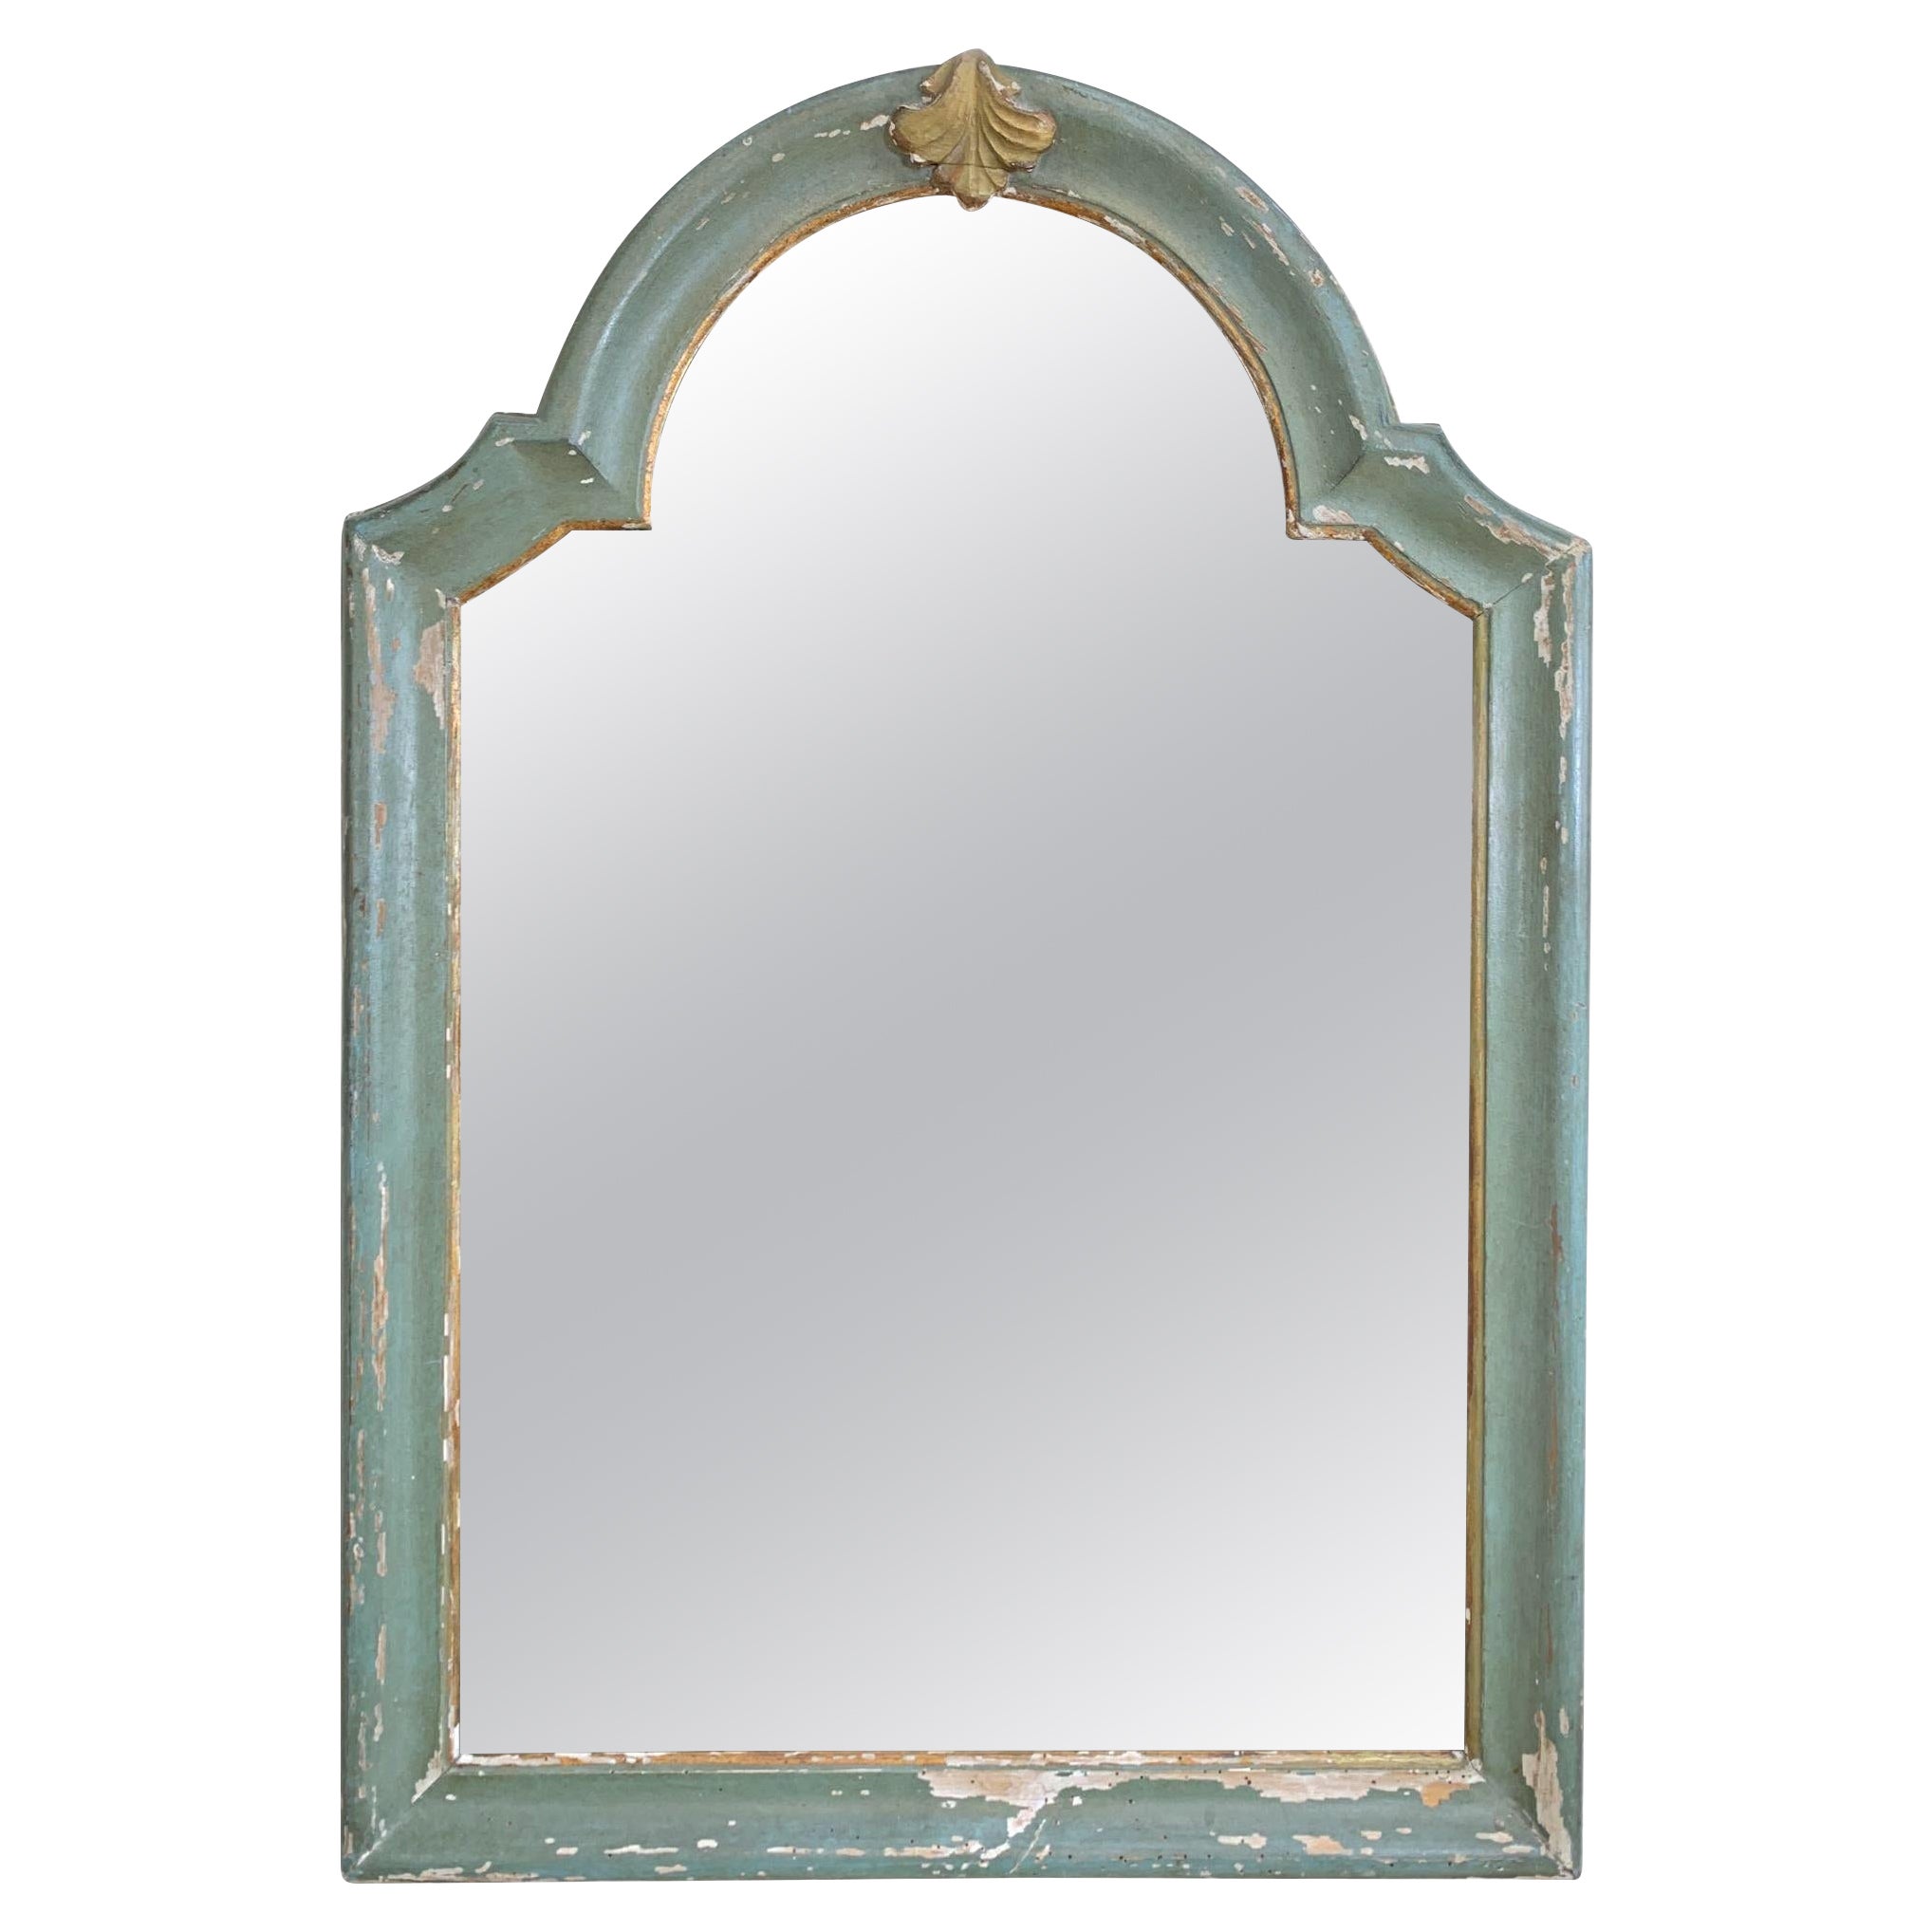  19th Century Green French Arch Top Mercury Mirror For Sale